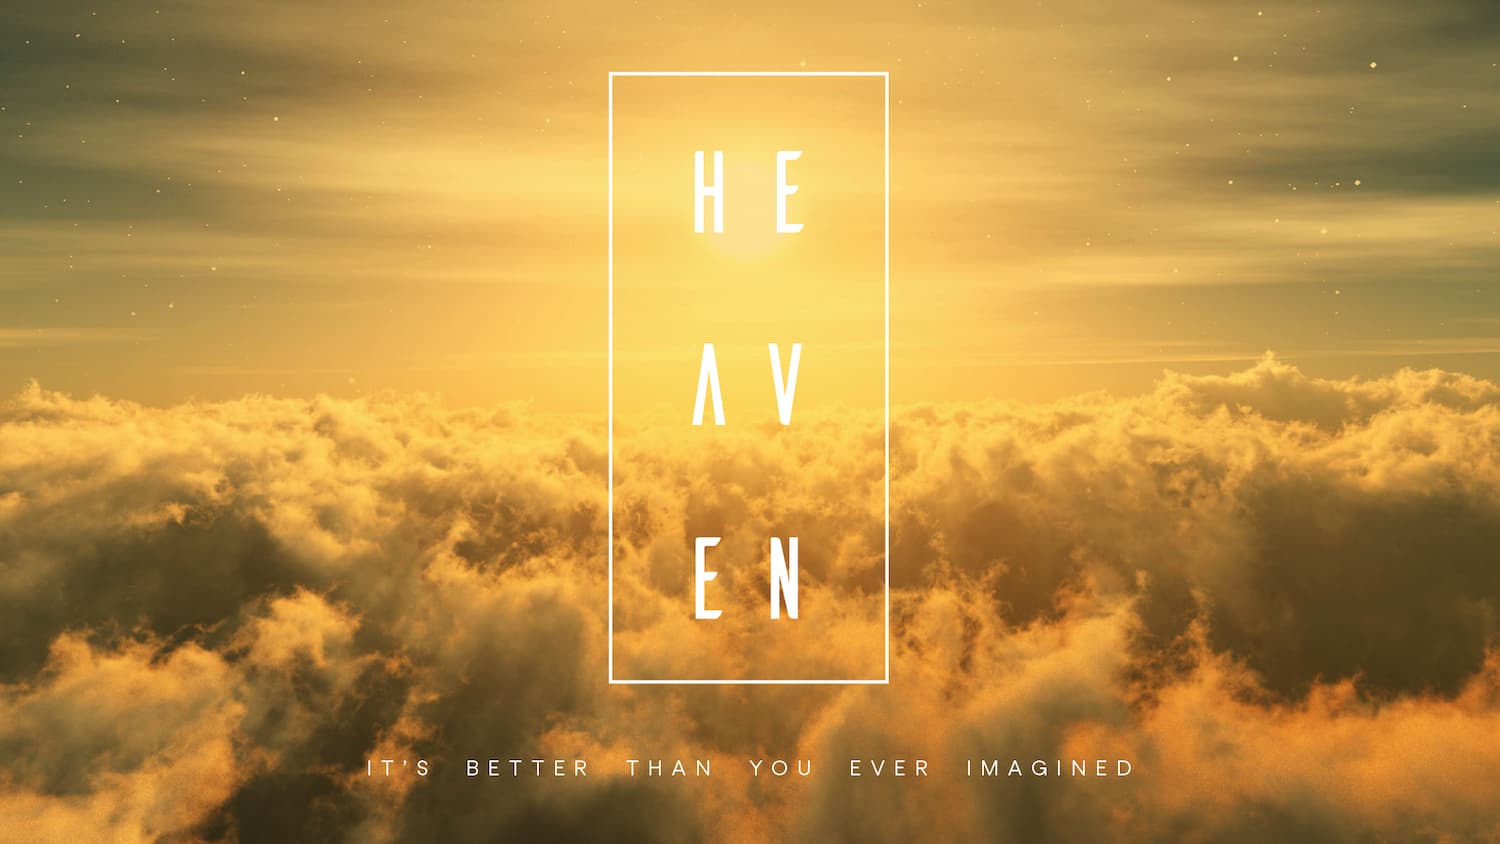 Many Christians today seem to doubt and know nothing of heaven. What do you know about heaven? What do you believe about it? Are you focused on heaven?

In this 6-week series, we cover a lot of ground as the Bible has much to say about our eternal destiny with him: Heaven.